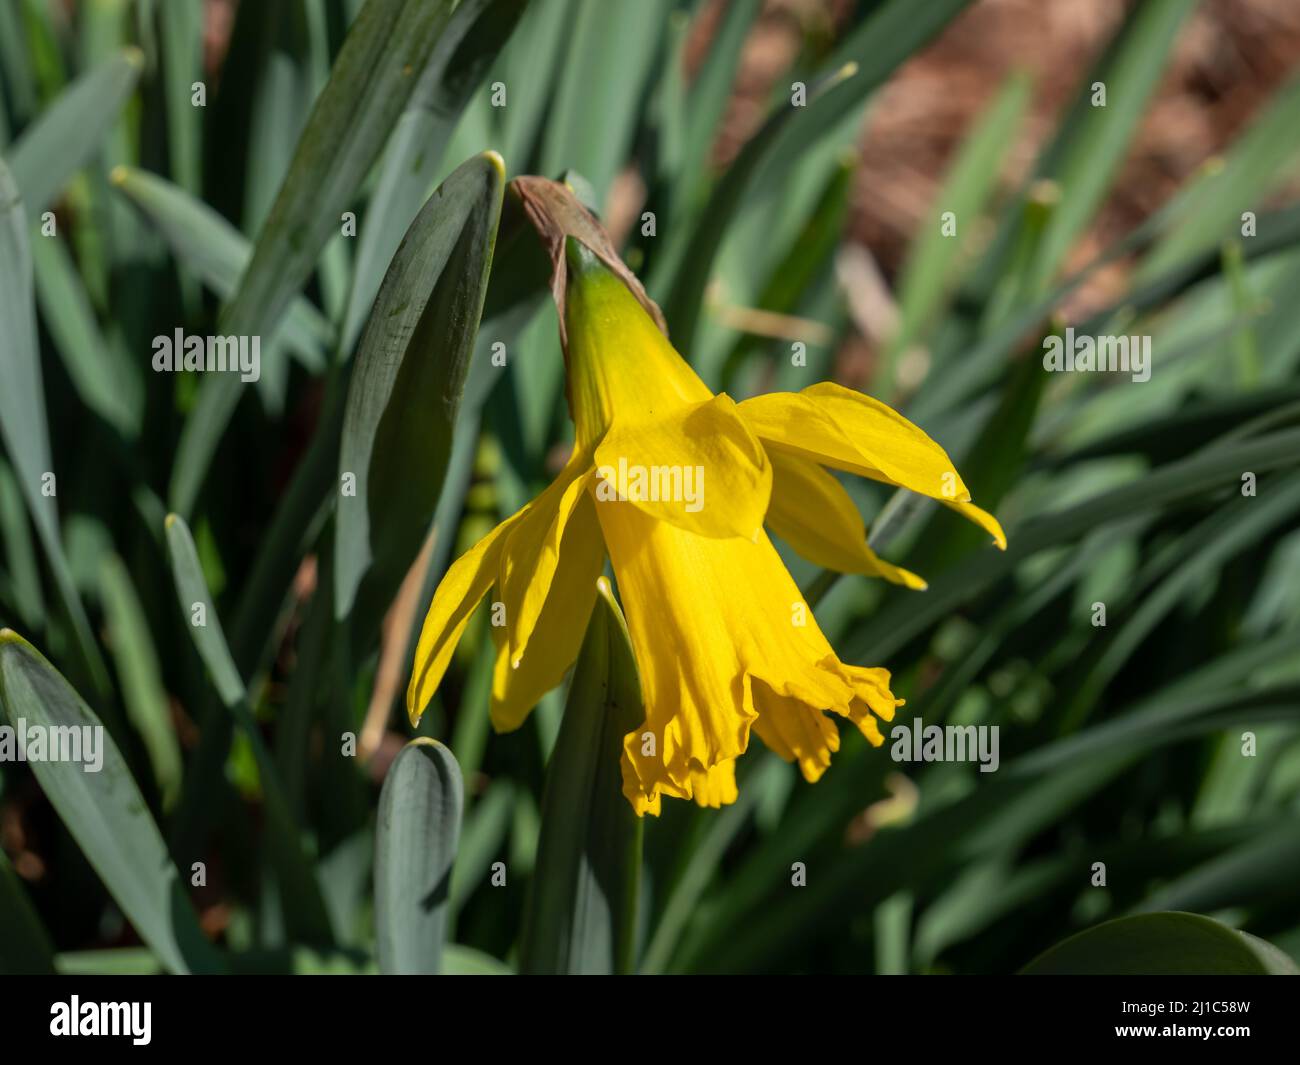 Yellow daffodil flowers in spring Stock Photo